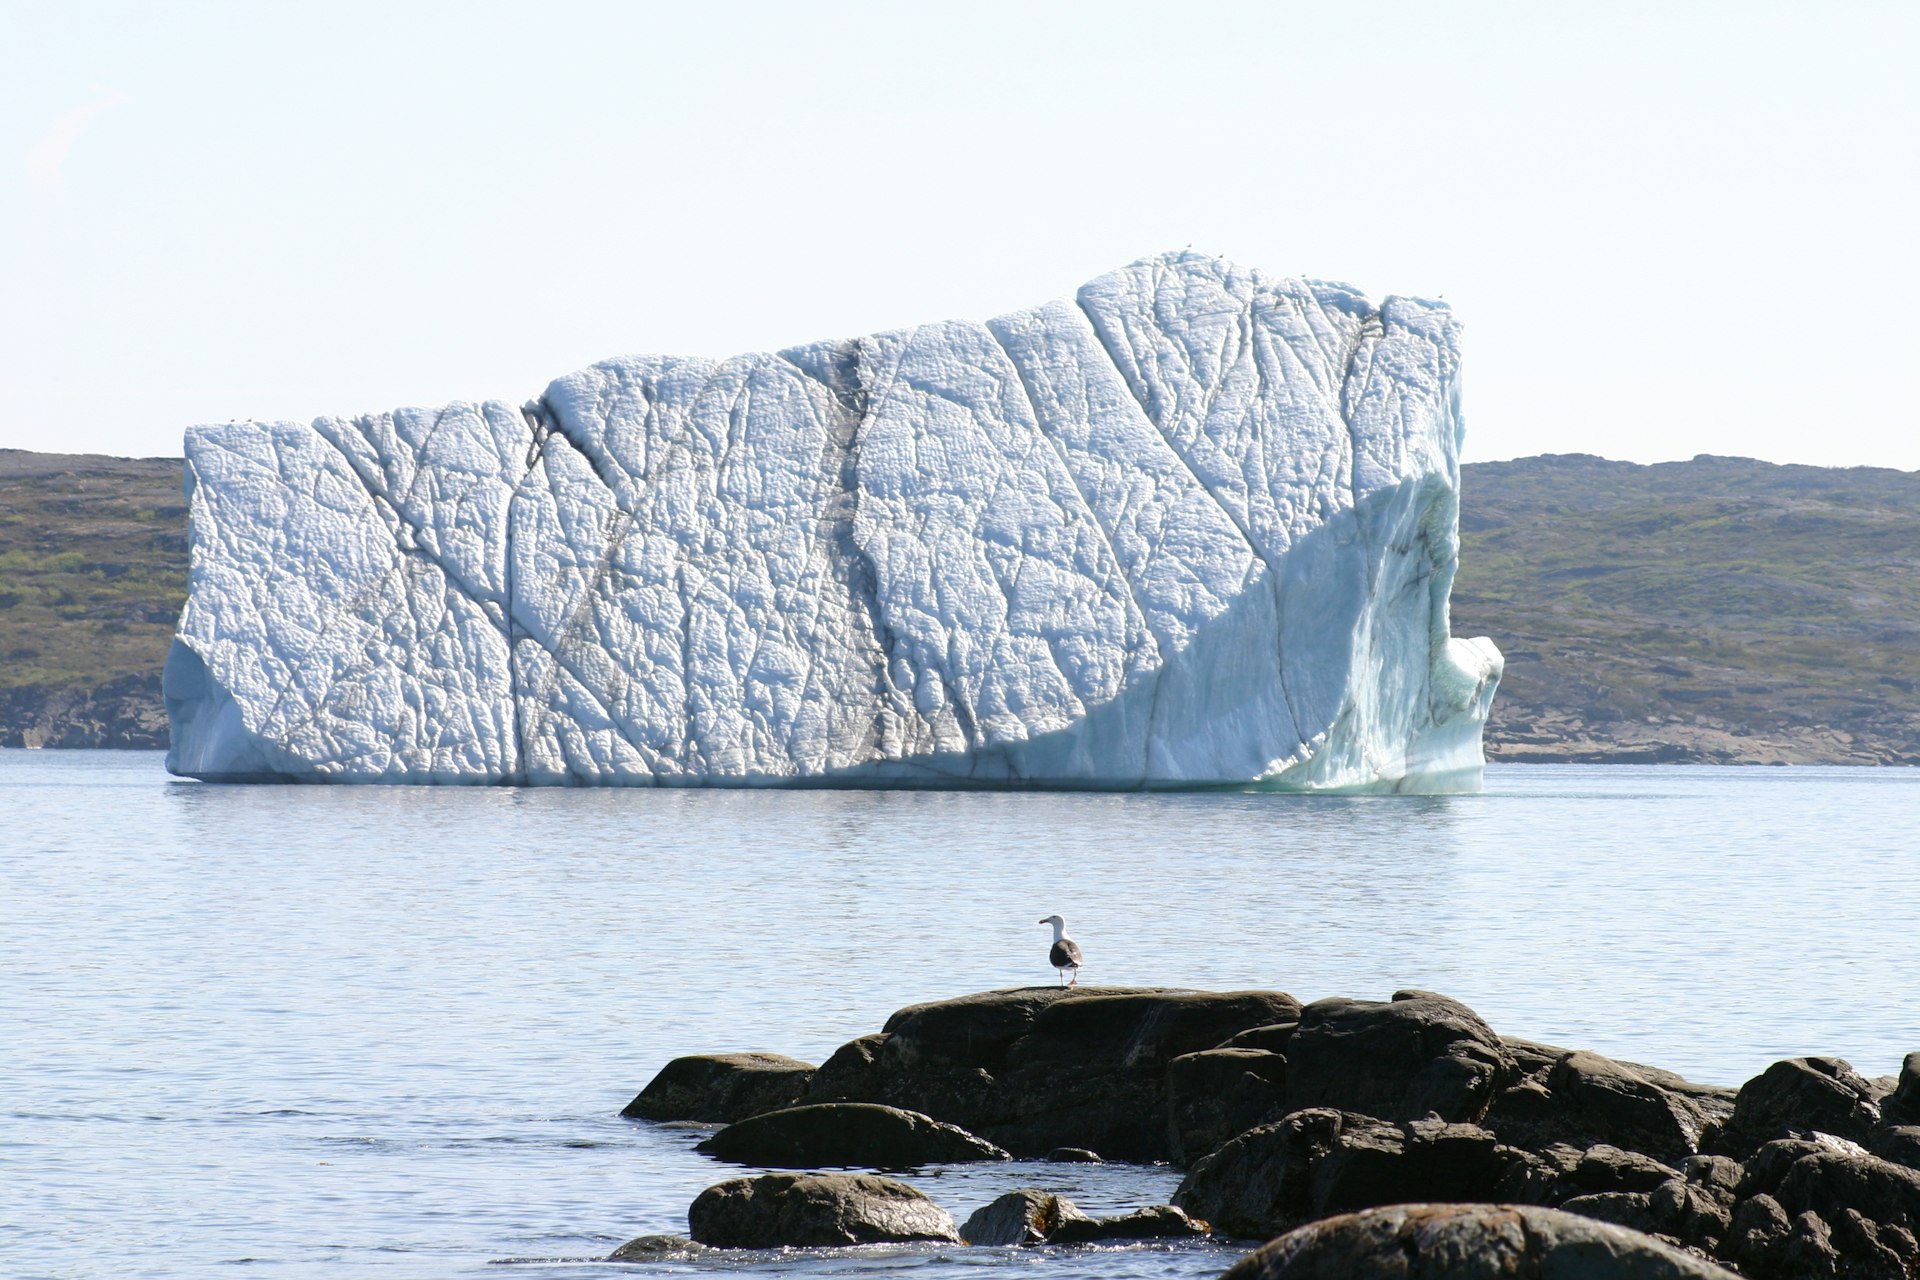 A huge iceberg floats by an island. A gull stands nearby, giving a sense of perspective to the scale of the 'berg